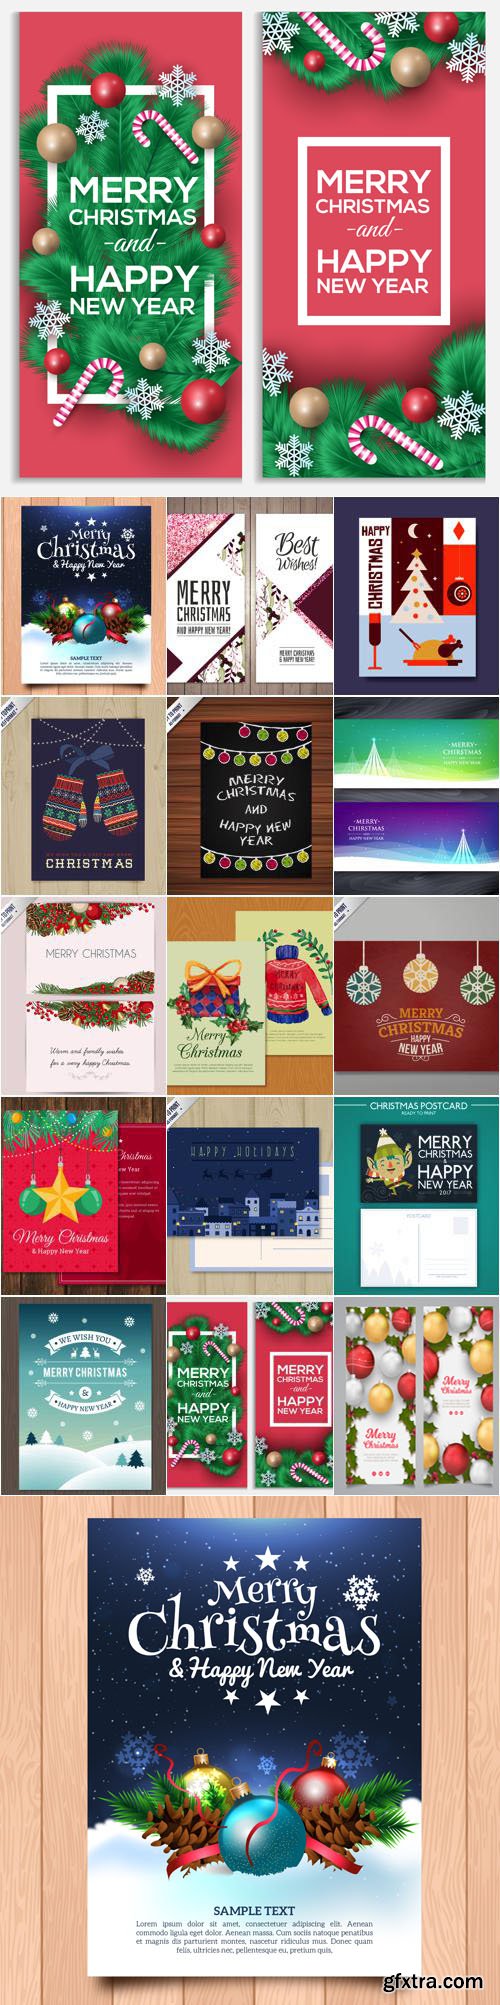 2017 Christmas & New Year Cards in Vector Vol.2 (20 Cards)